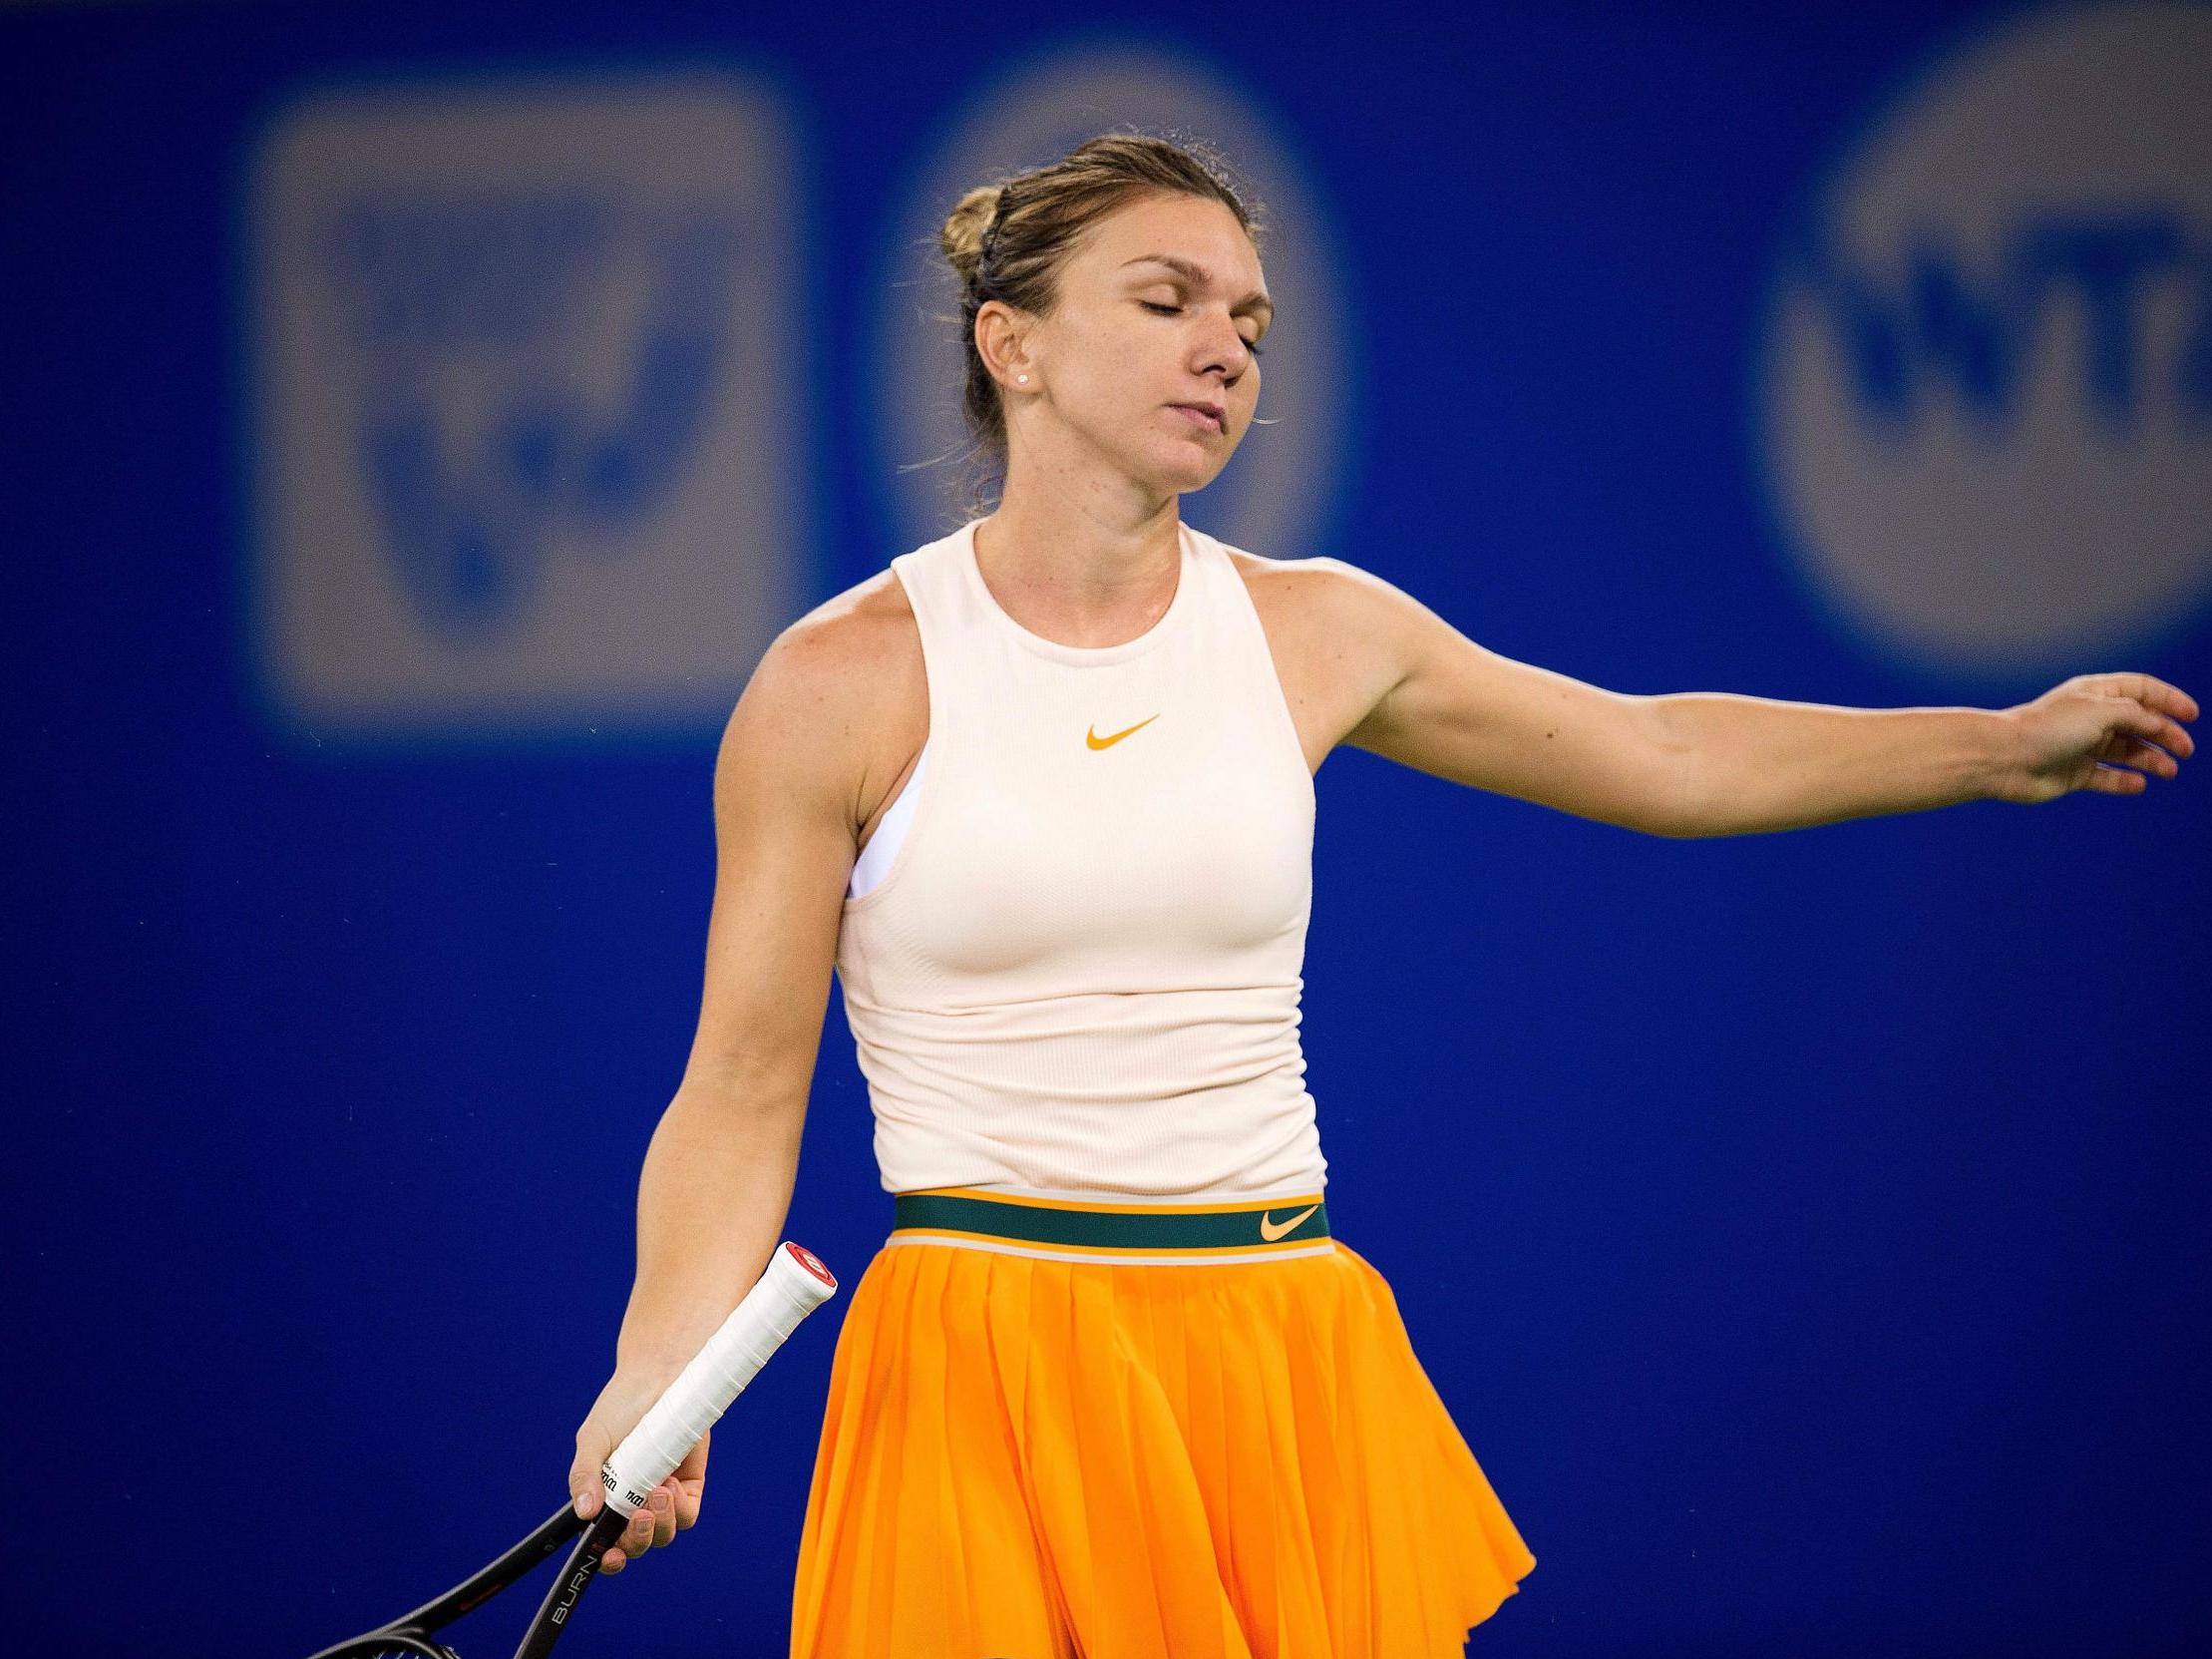 Halep has already guaranteed she will finish the year on top of the rankings